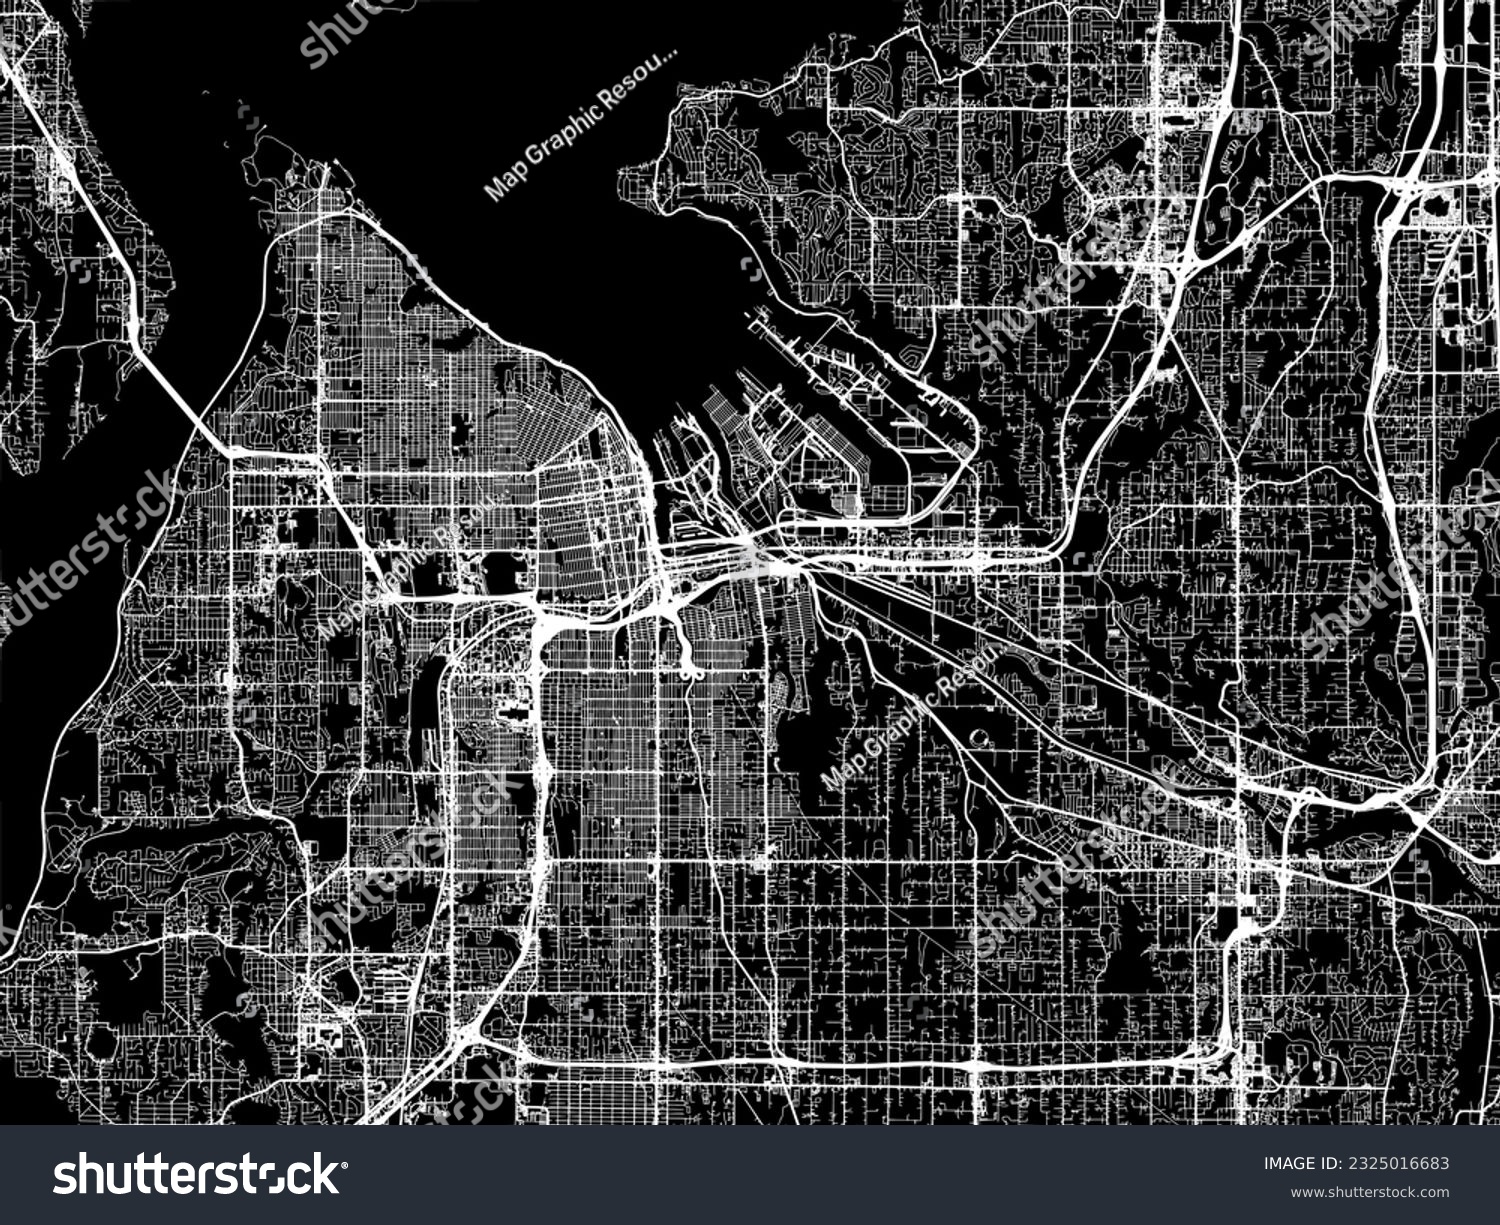 SVG of Vector city map of Tacoma Washington in the United States of America with white roads isolated on a black background. svg